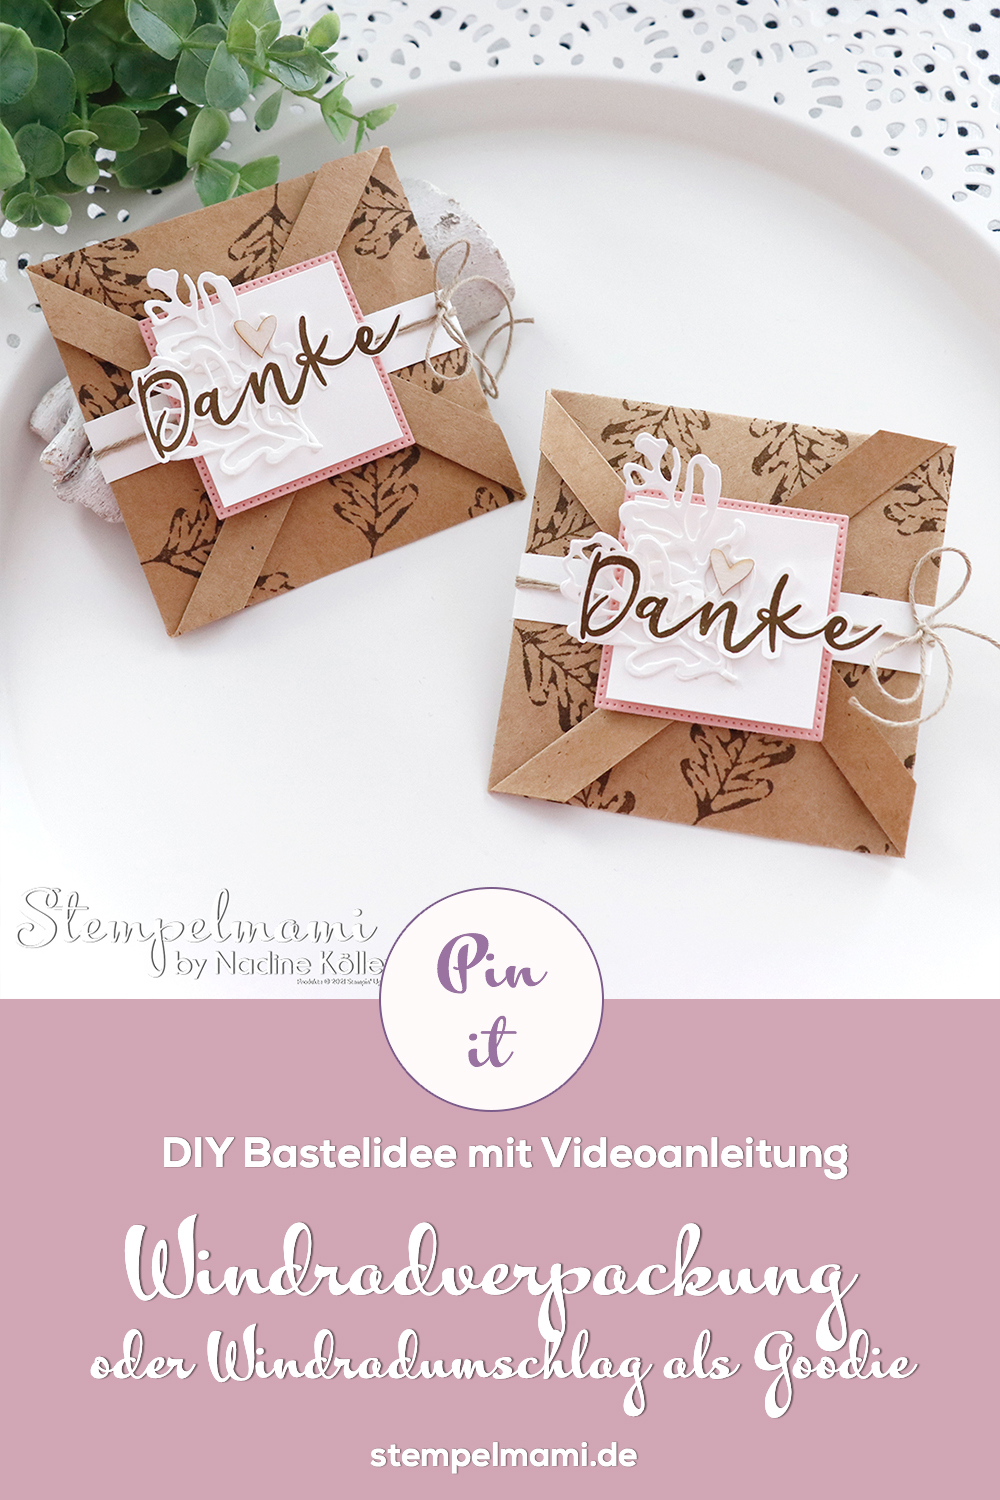 Stampin Up Video Anleitung Windradverpackung oder Windradumschlag als Goodie Stempelmami Youtube 12